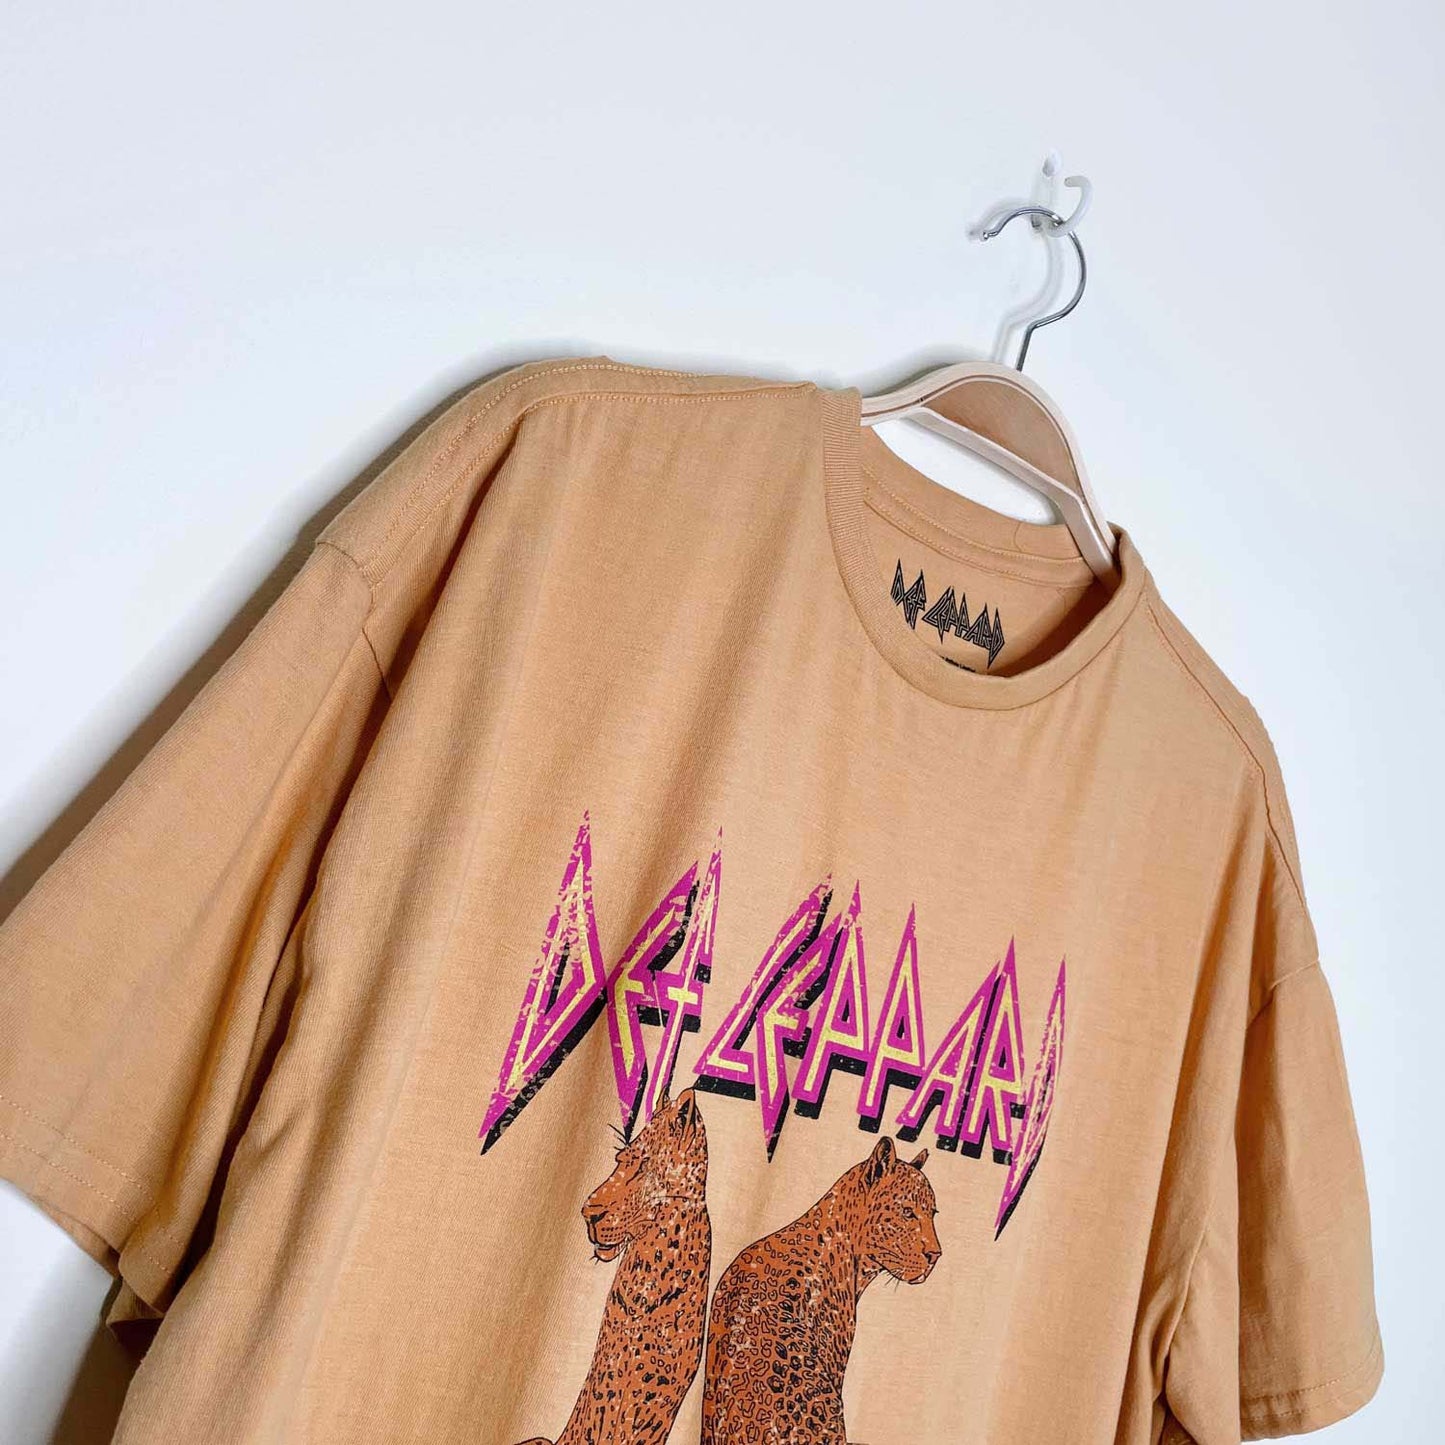 def leppard 2022 double leopard band tee - size large